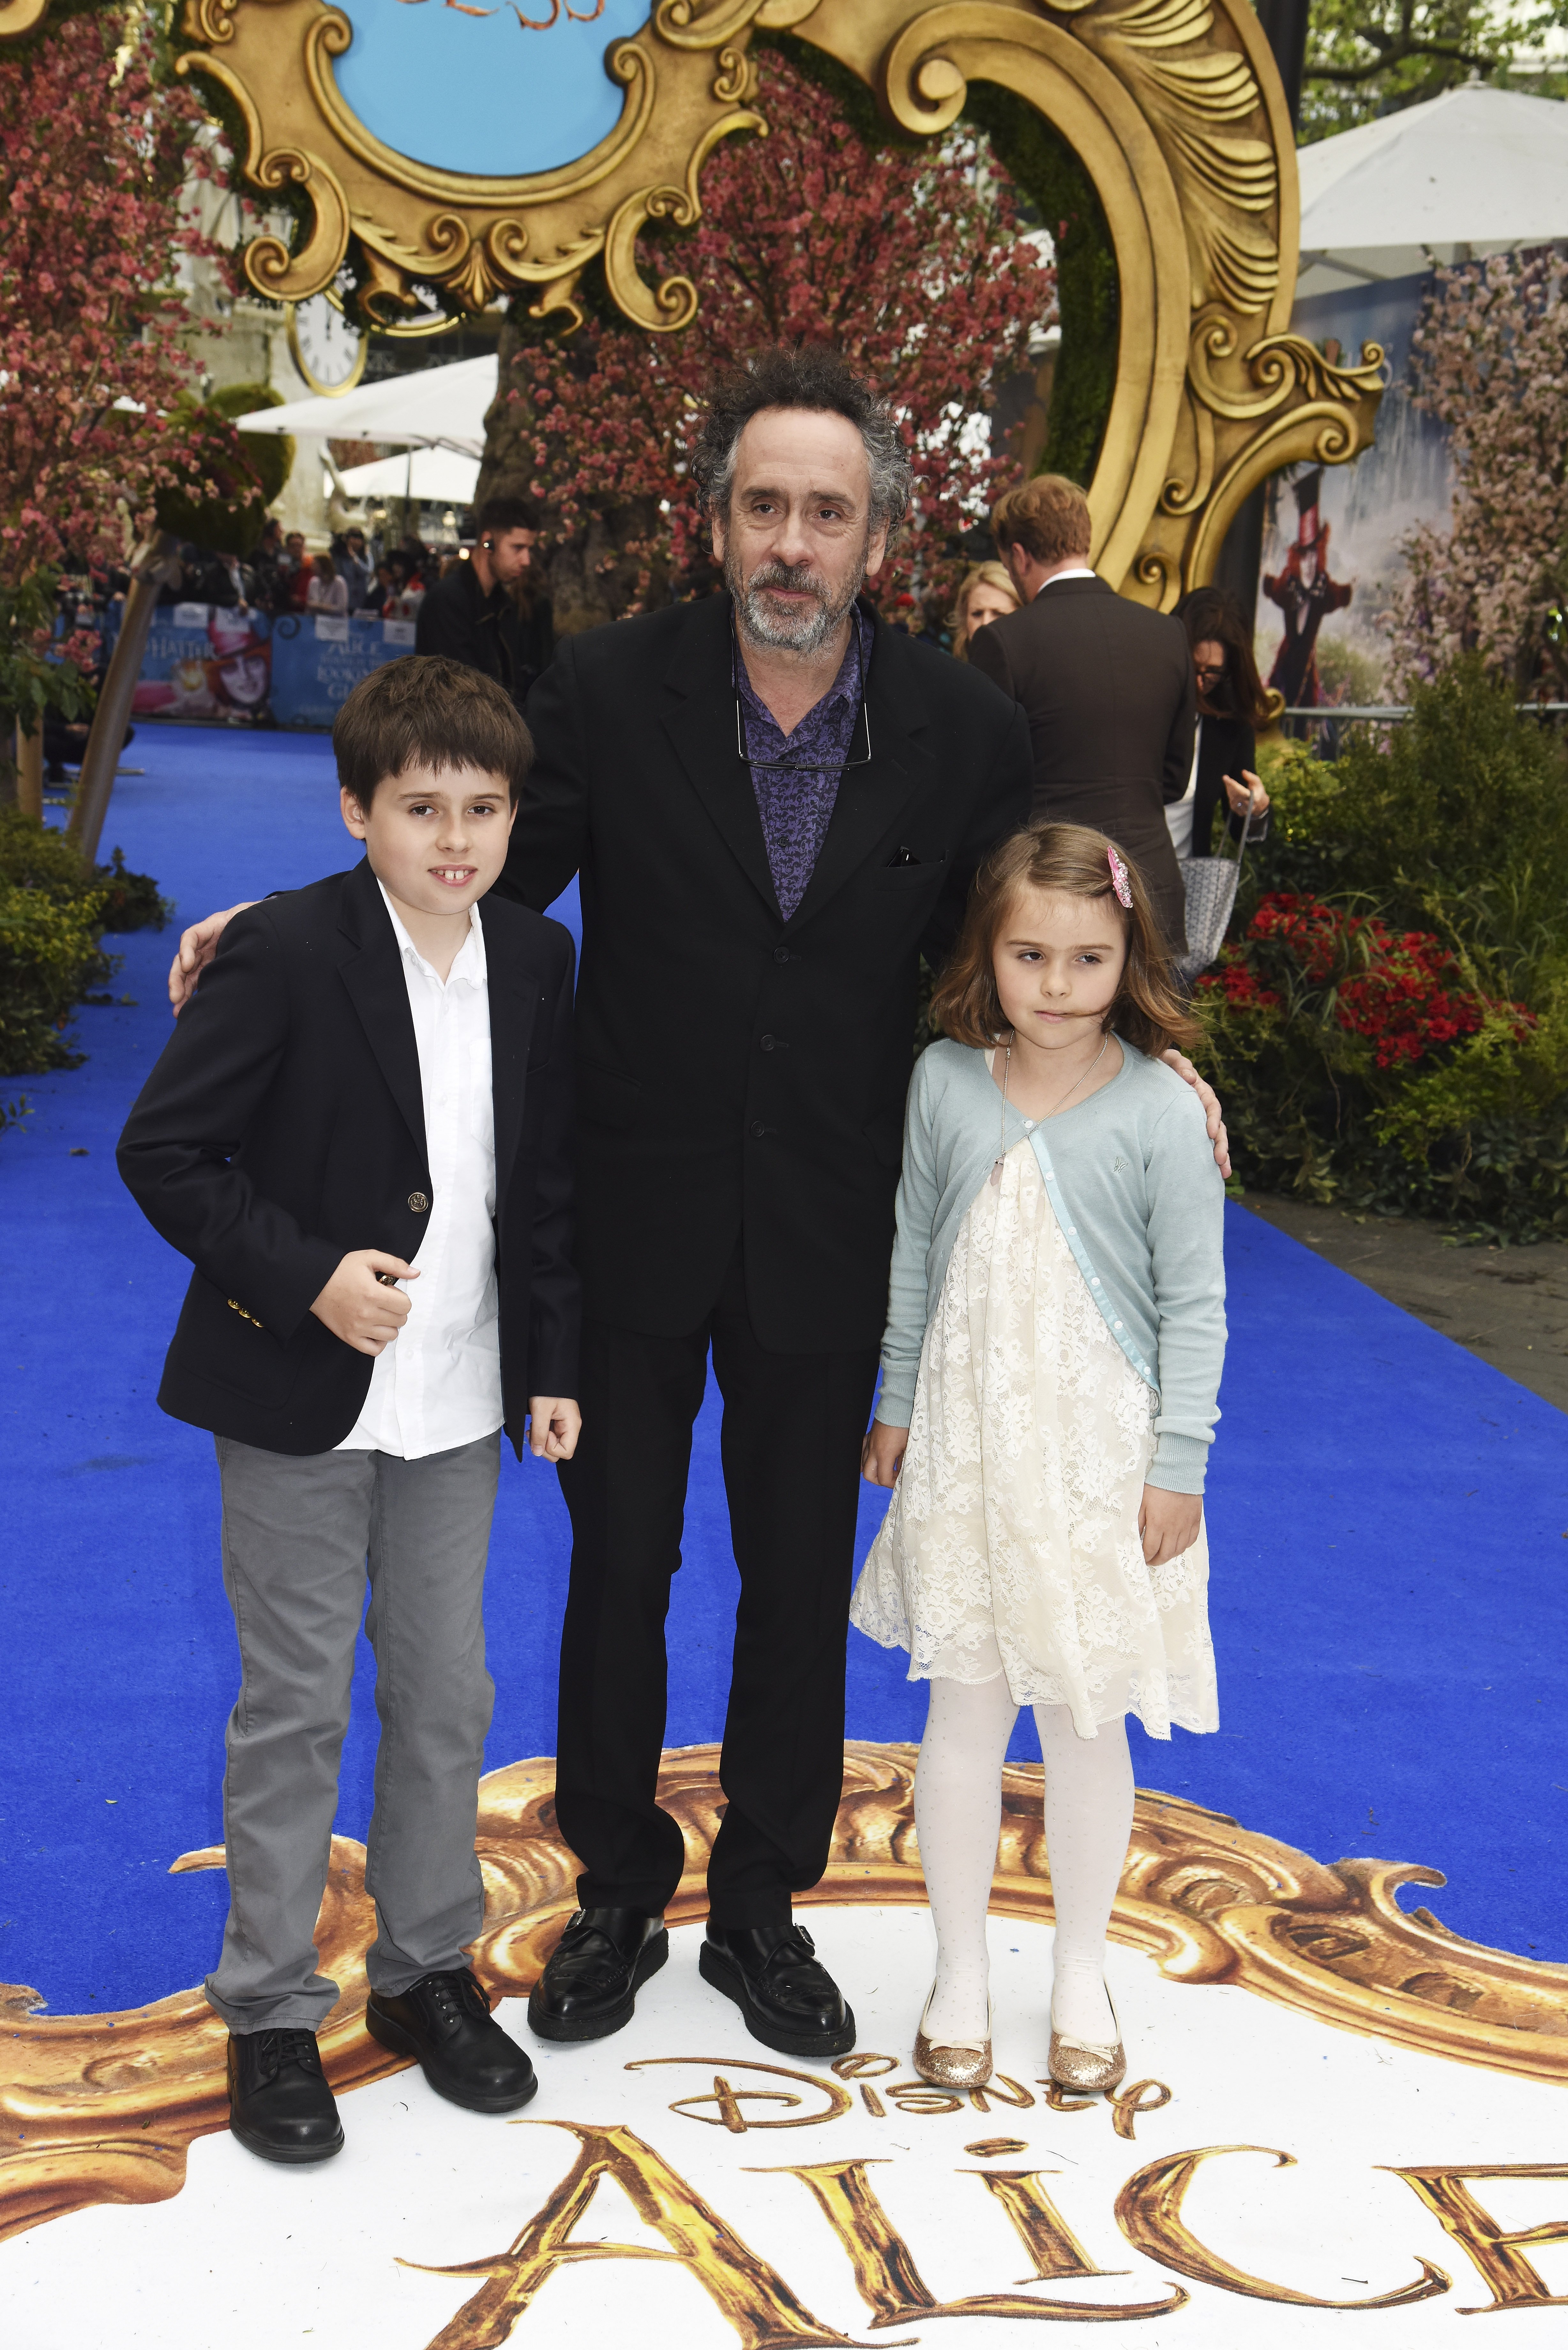 Billy Raymond Burton: Meet Tim Burton's Son Who as Toddler Landed His First Role